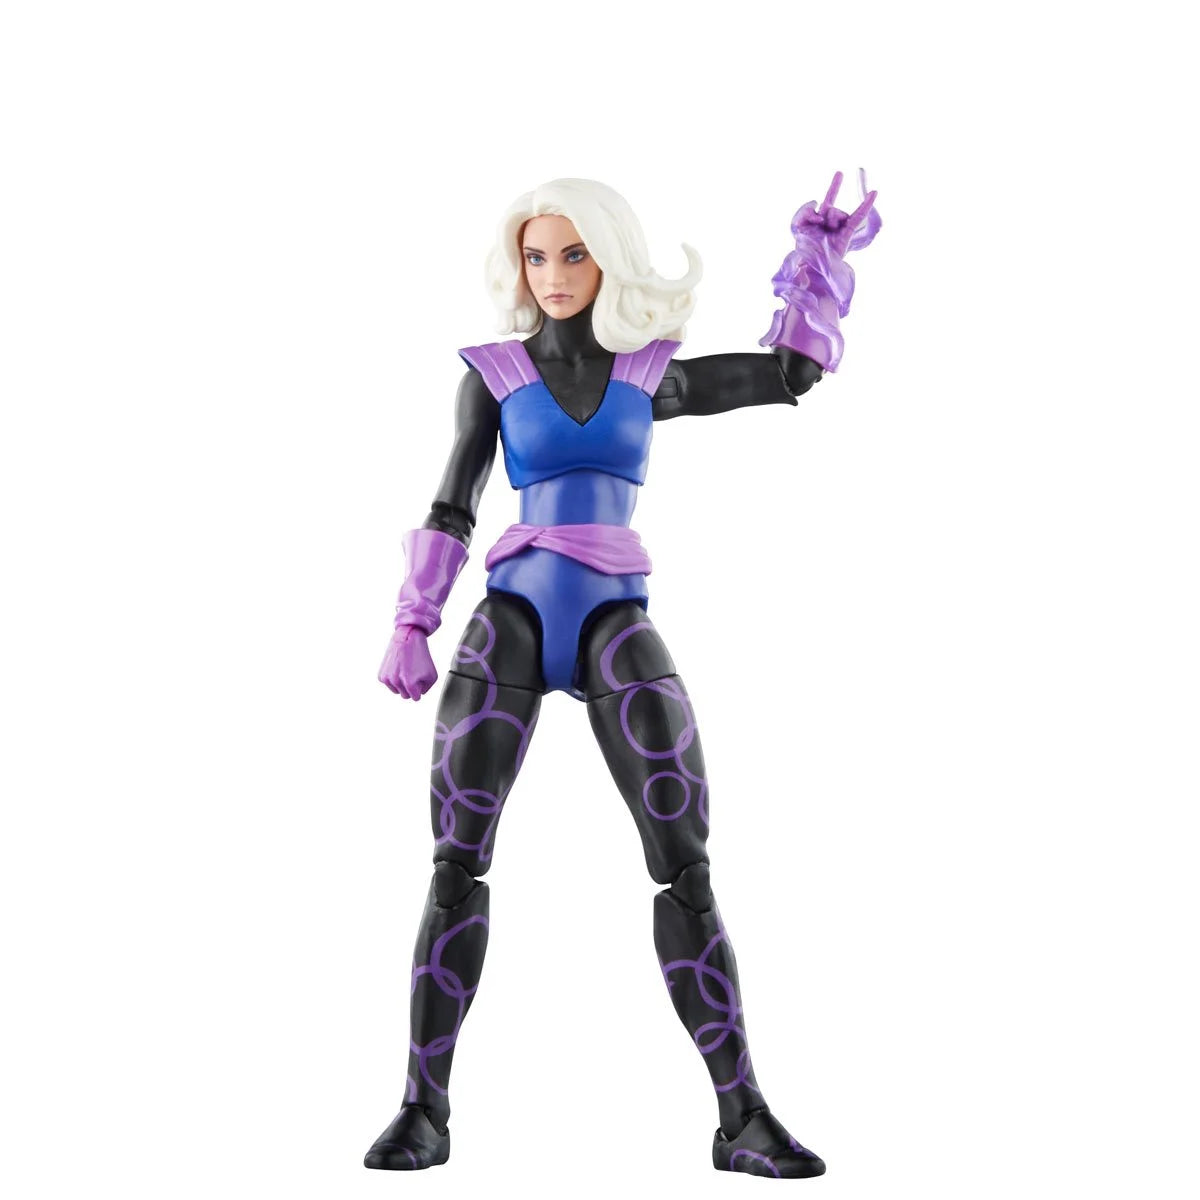 Marvel Knights Marvel Legends Clea 6-Inch Action Figure